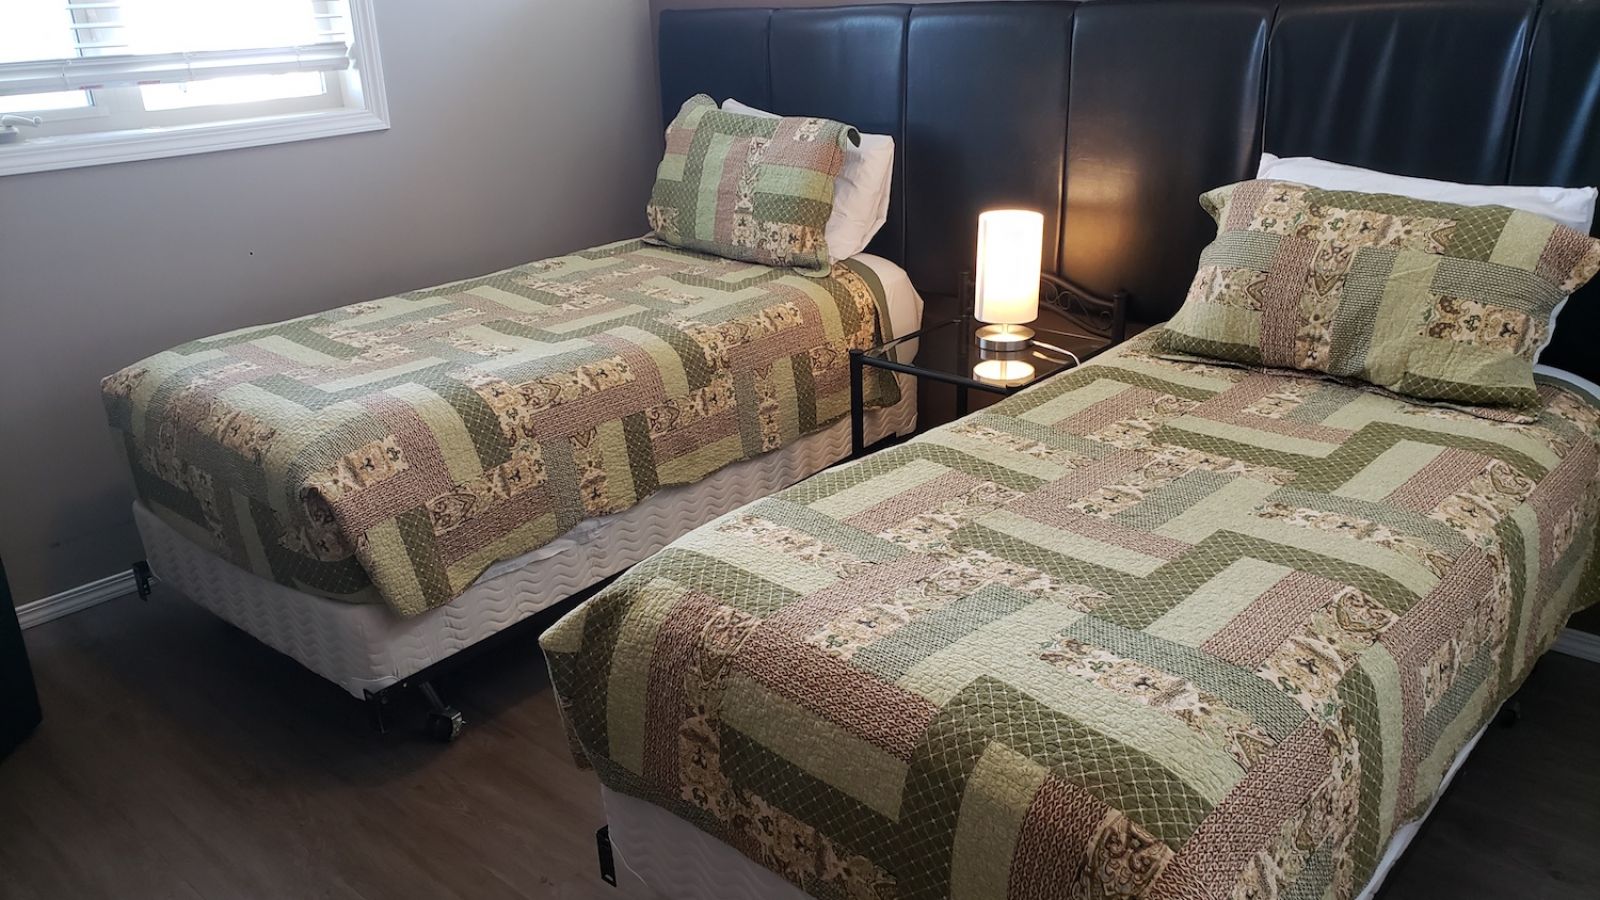 Pinnacle Point Condos - typical bedrooms